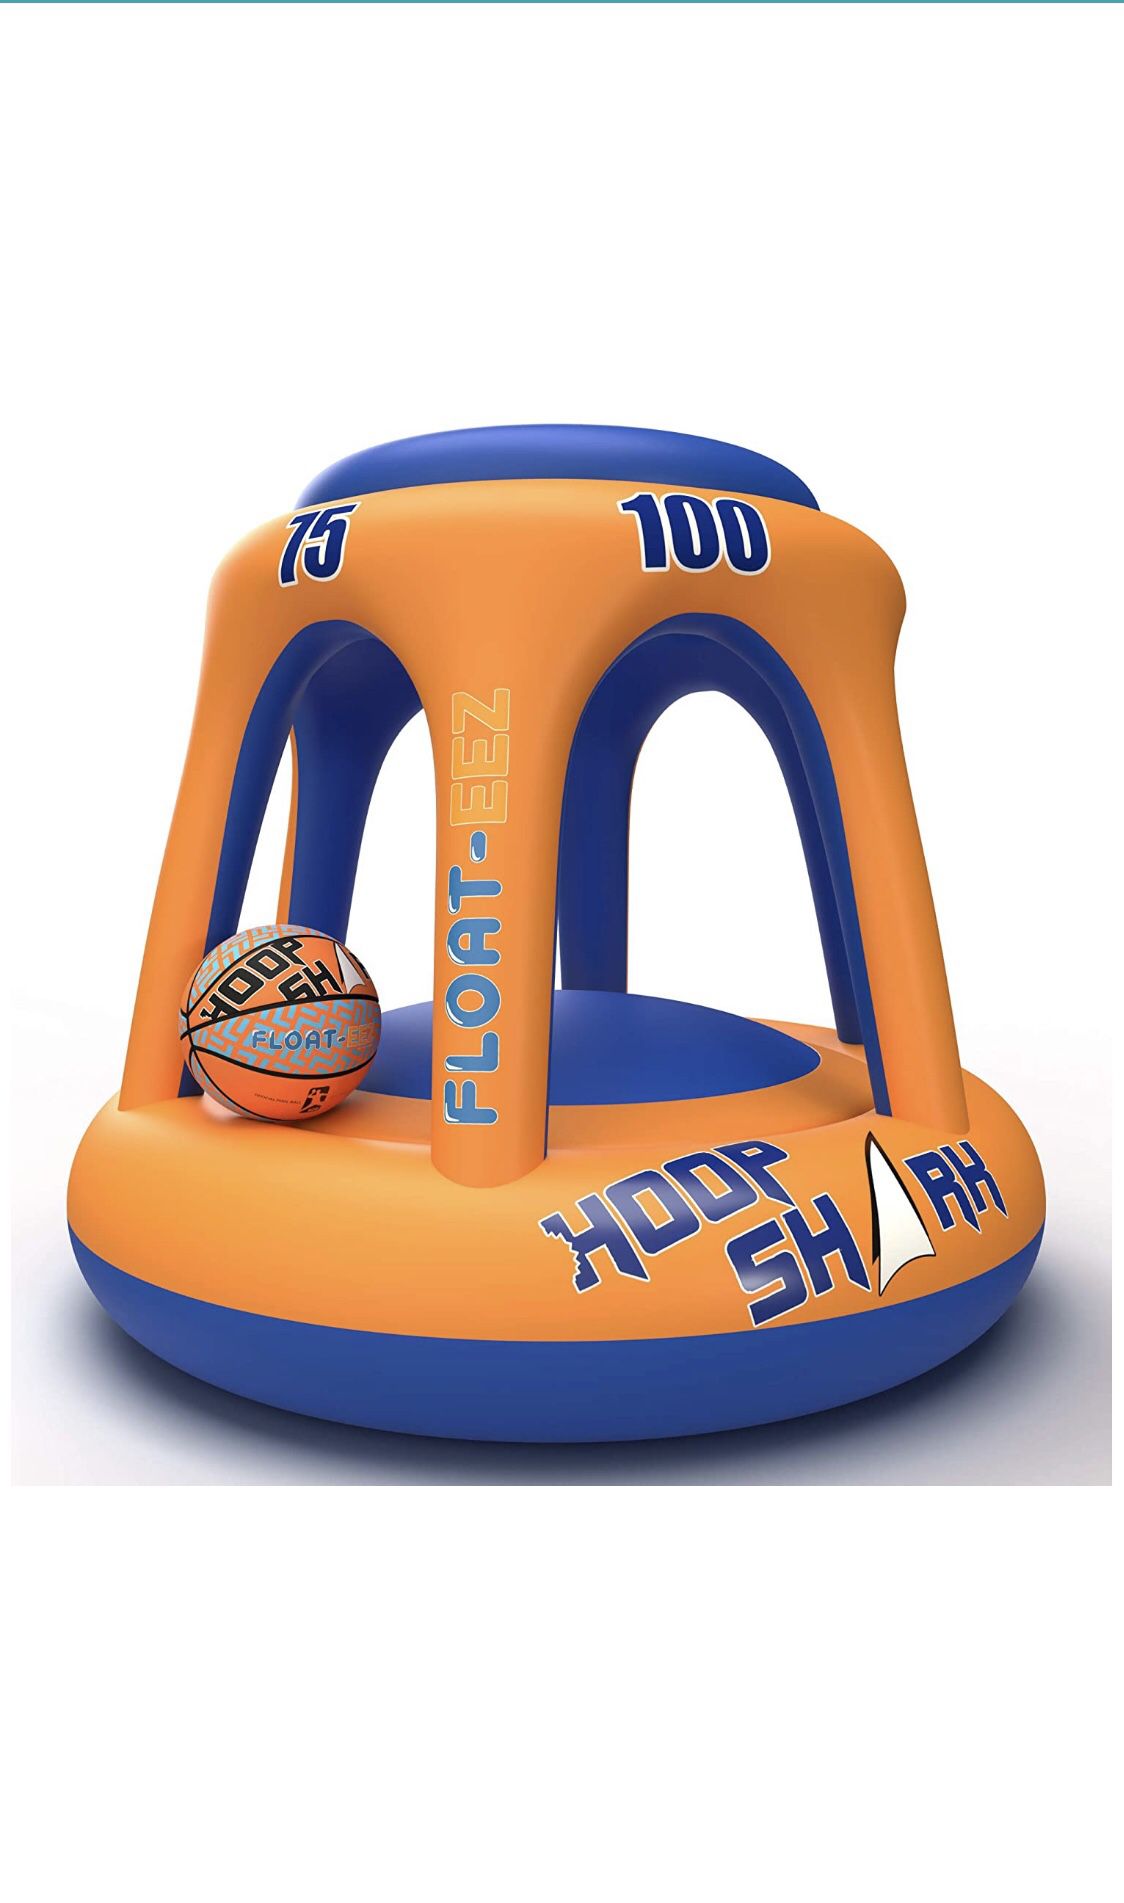 Inflatable basketball hoop for the pool